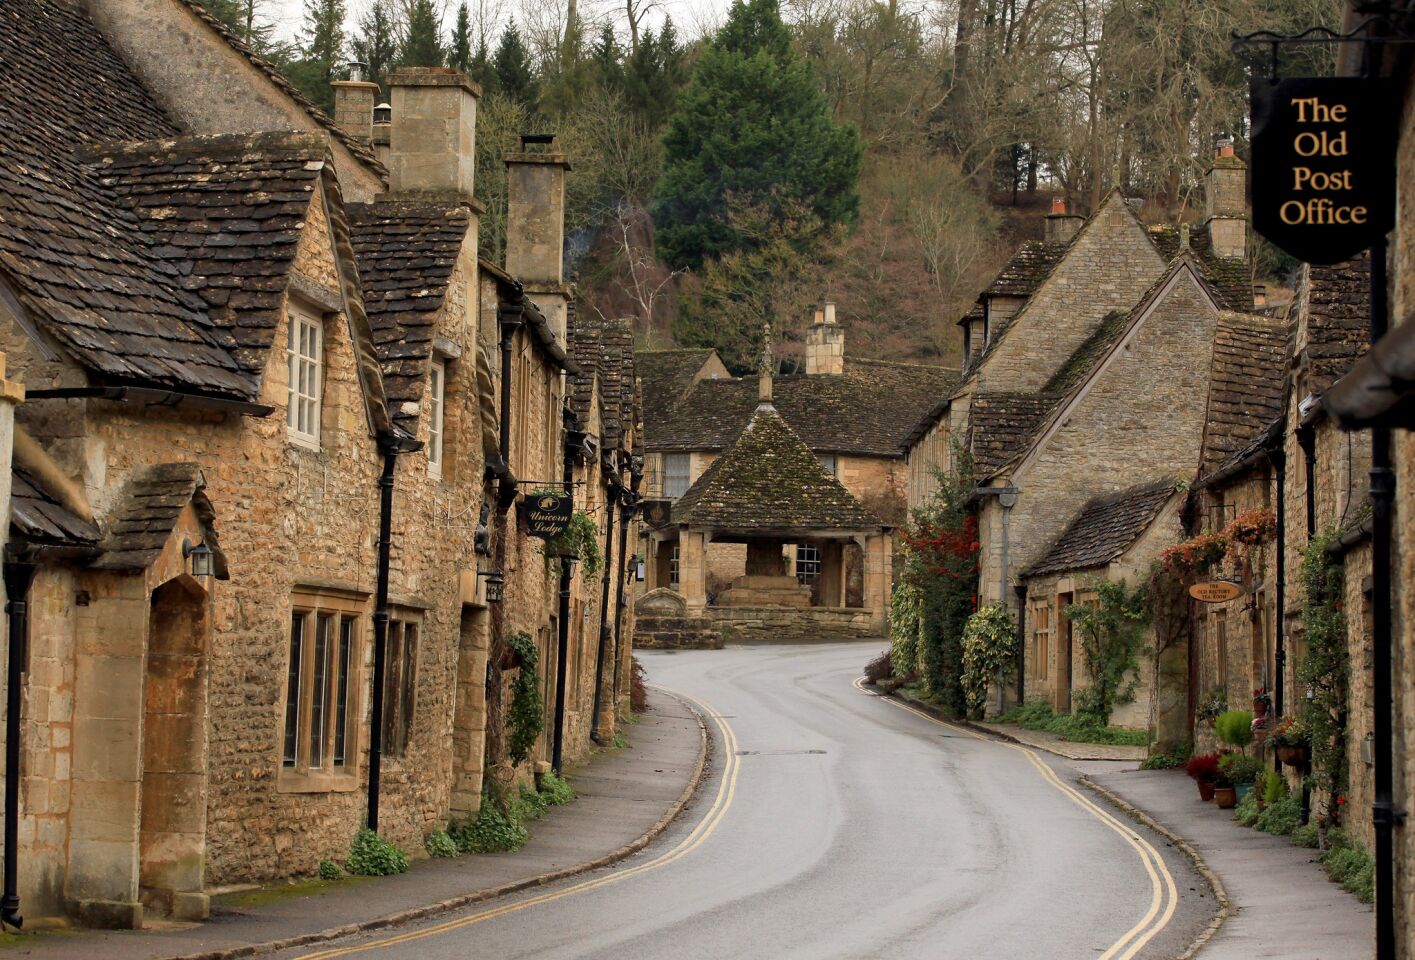 Known for its picturesque scenery, Castle Combe in Britain's Wiltshire County about 20 miles east of Bristol was named the country's prettiest village in 1962 in a national poll conducted by British Travel Assn., precursor to the British Tourist Authority. More photos...